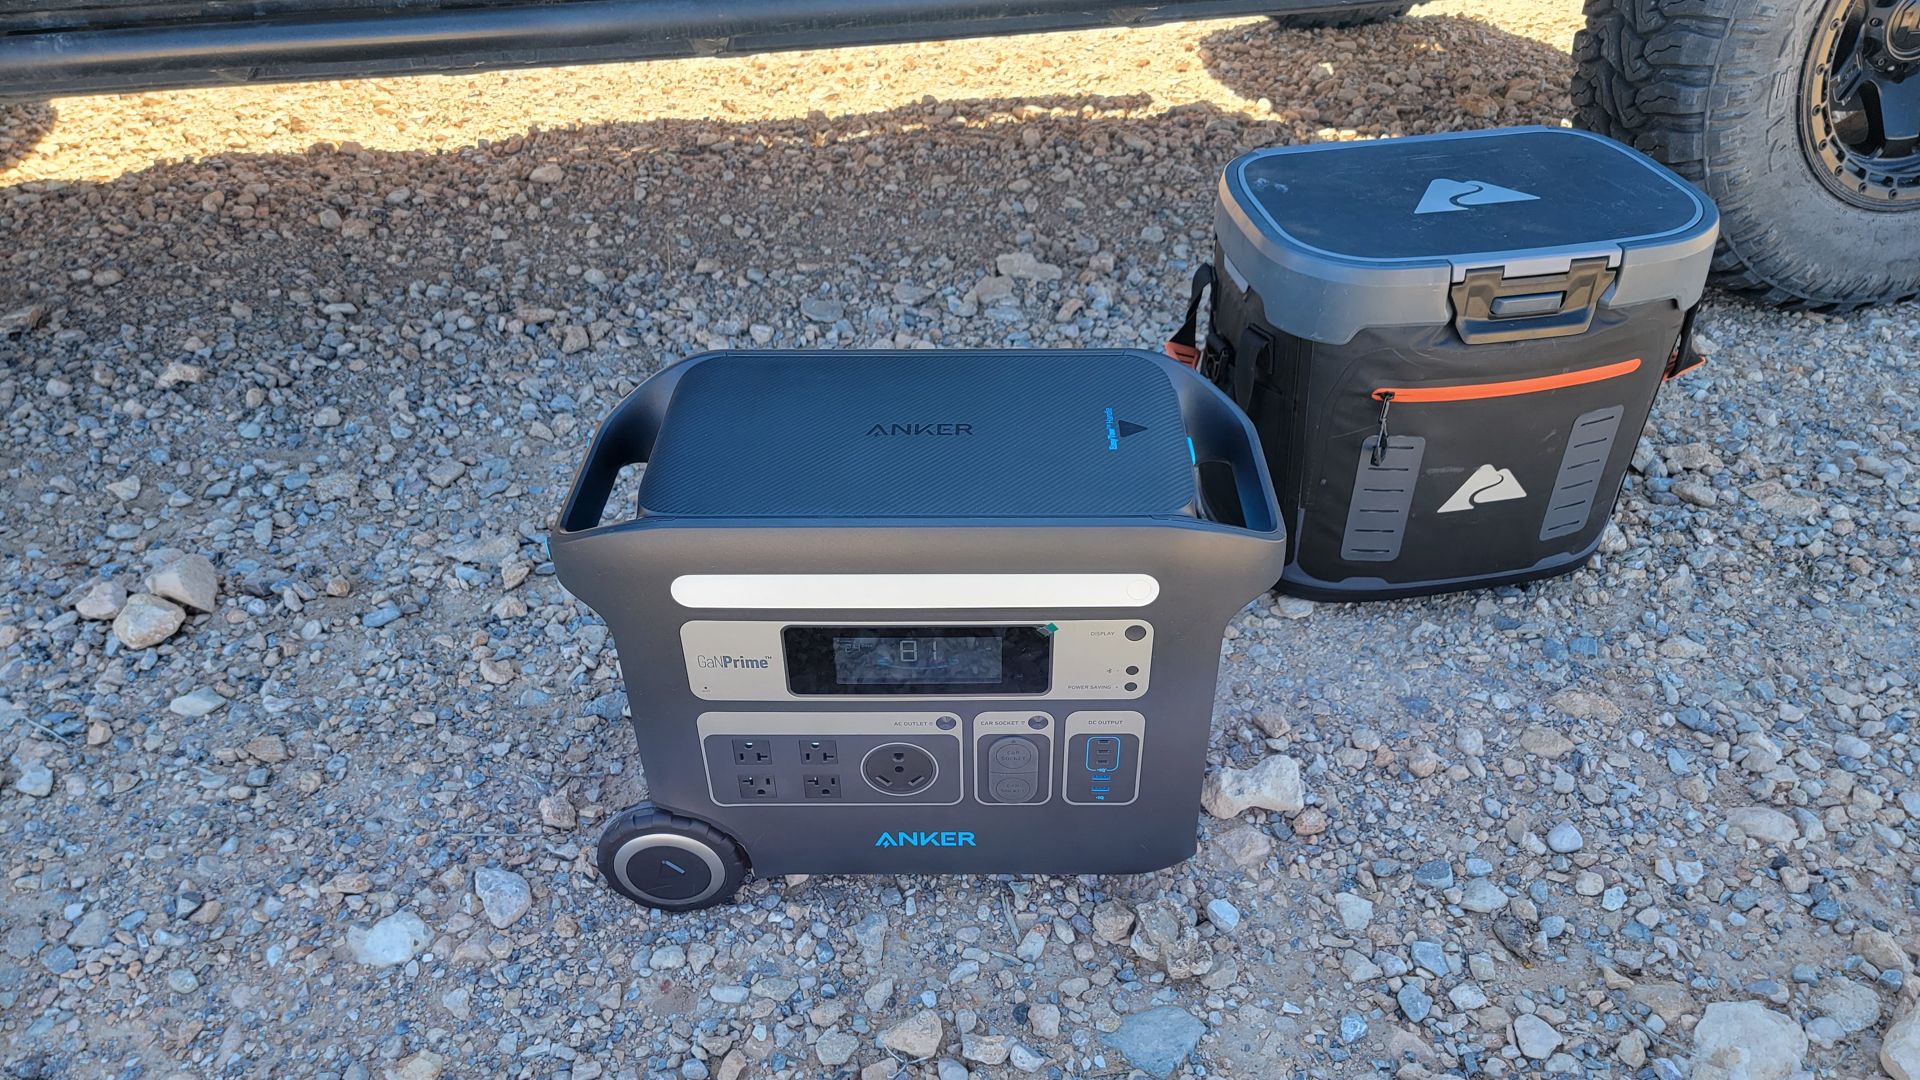 Anker 767 next to a cooler for size comparison.